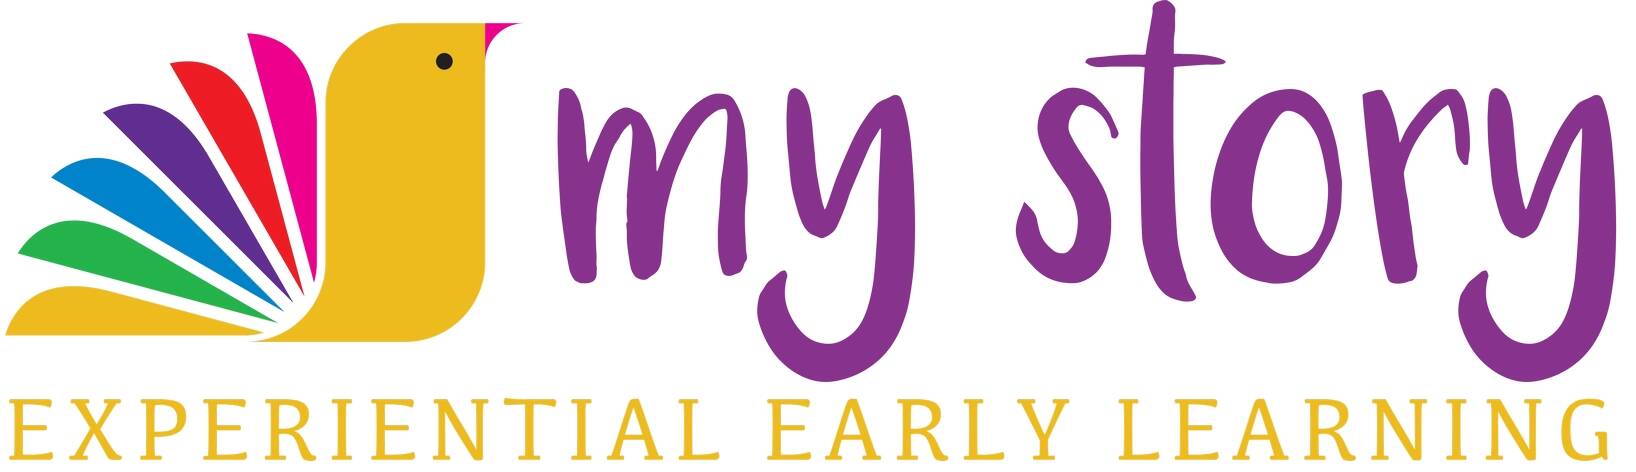 My Story - Experiential Early Learning